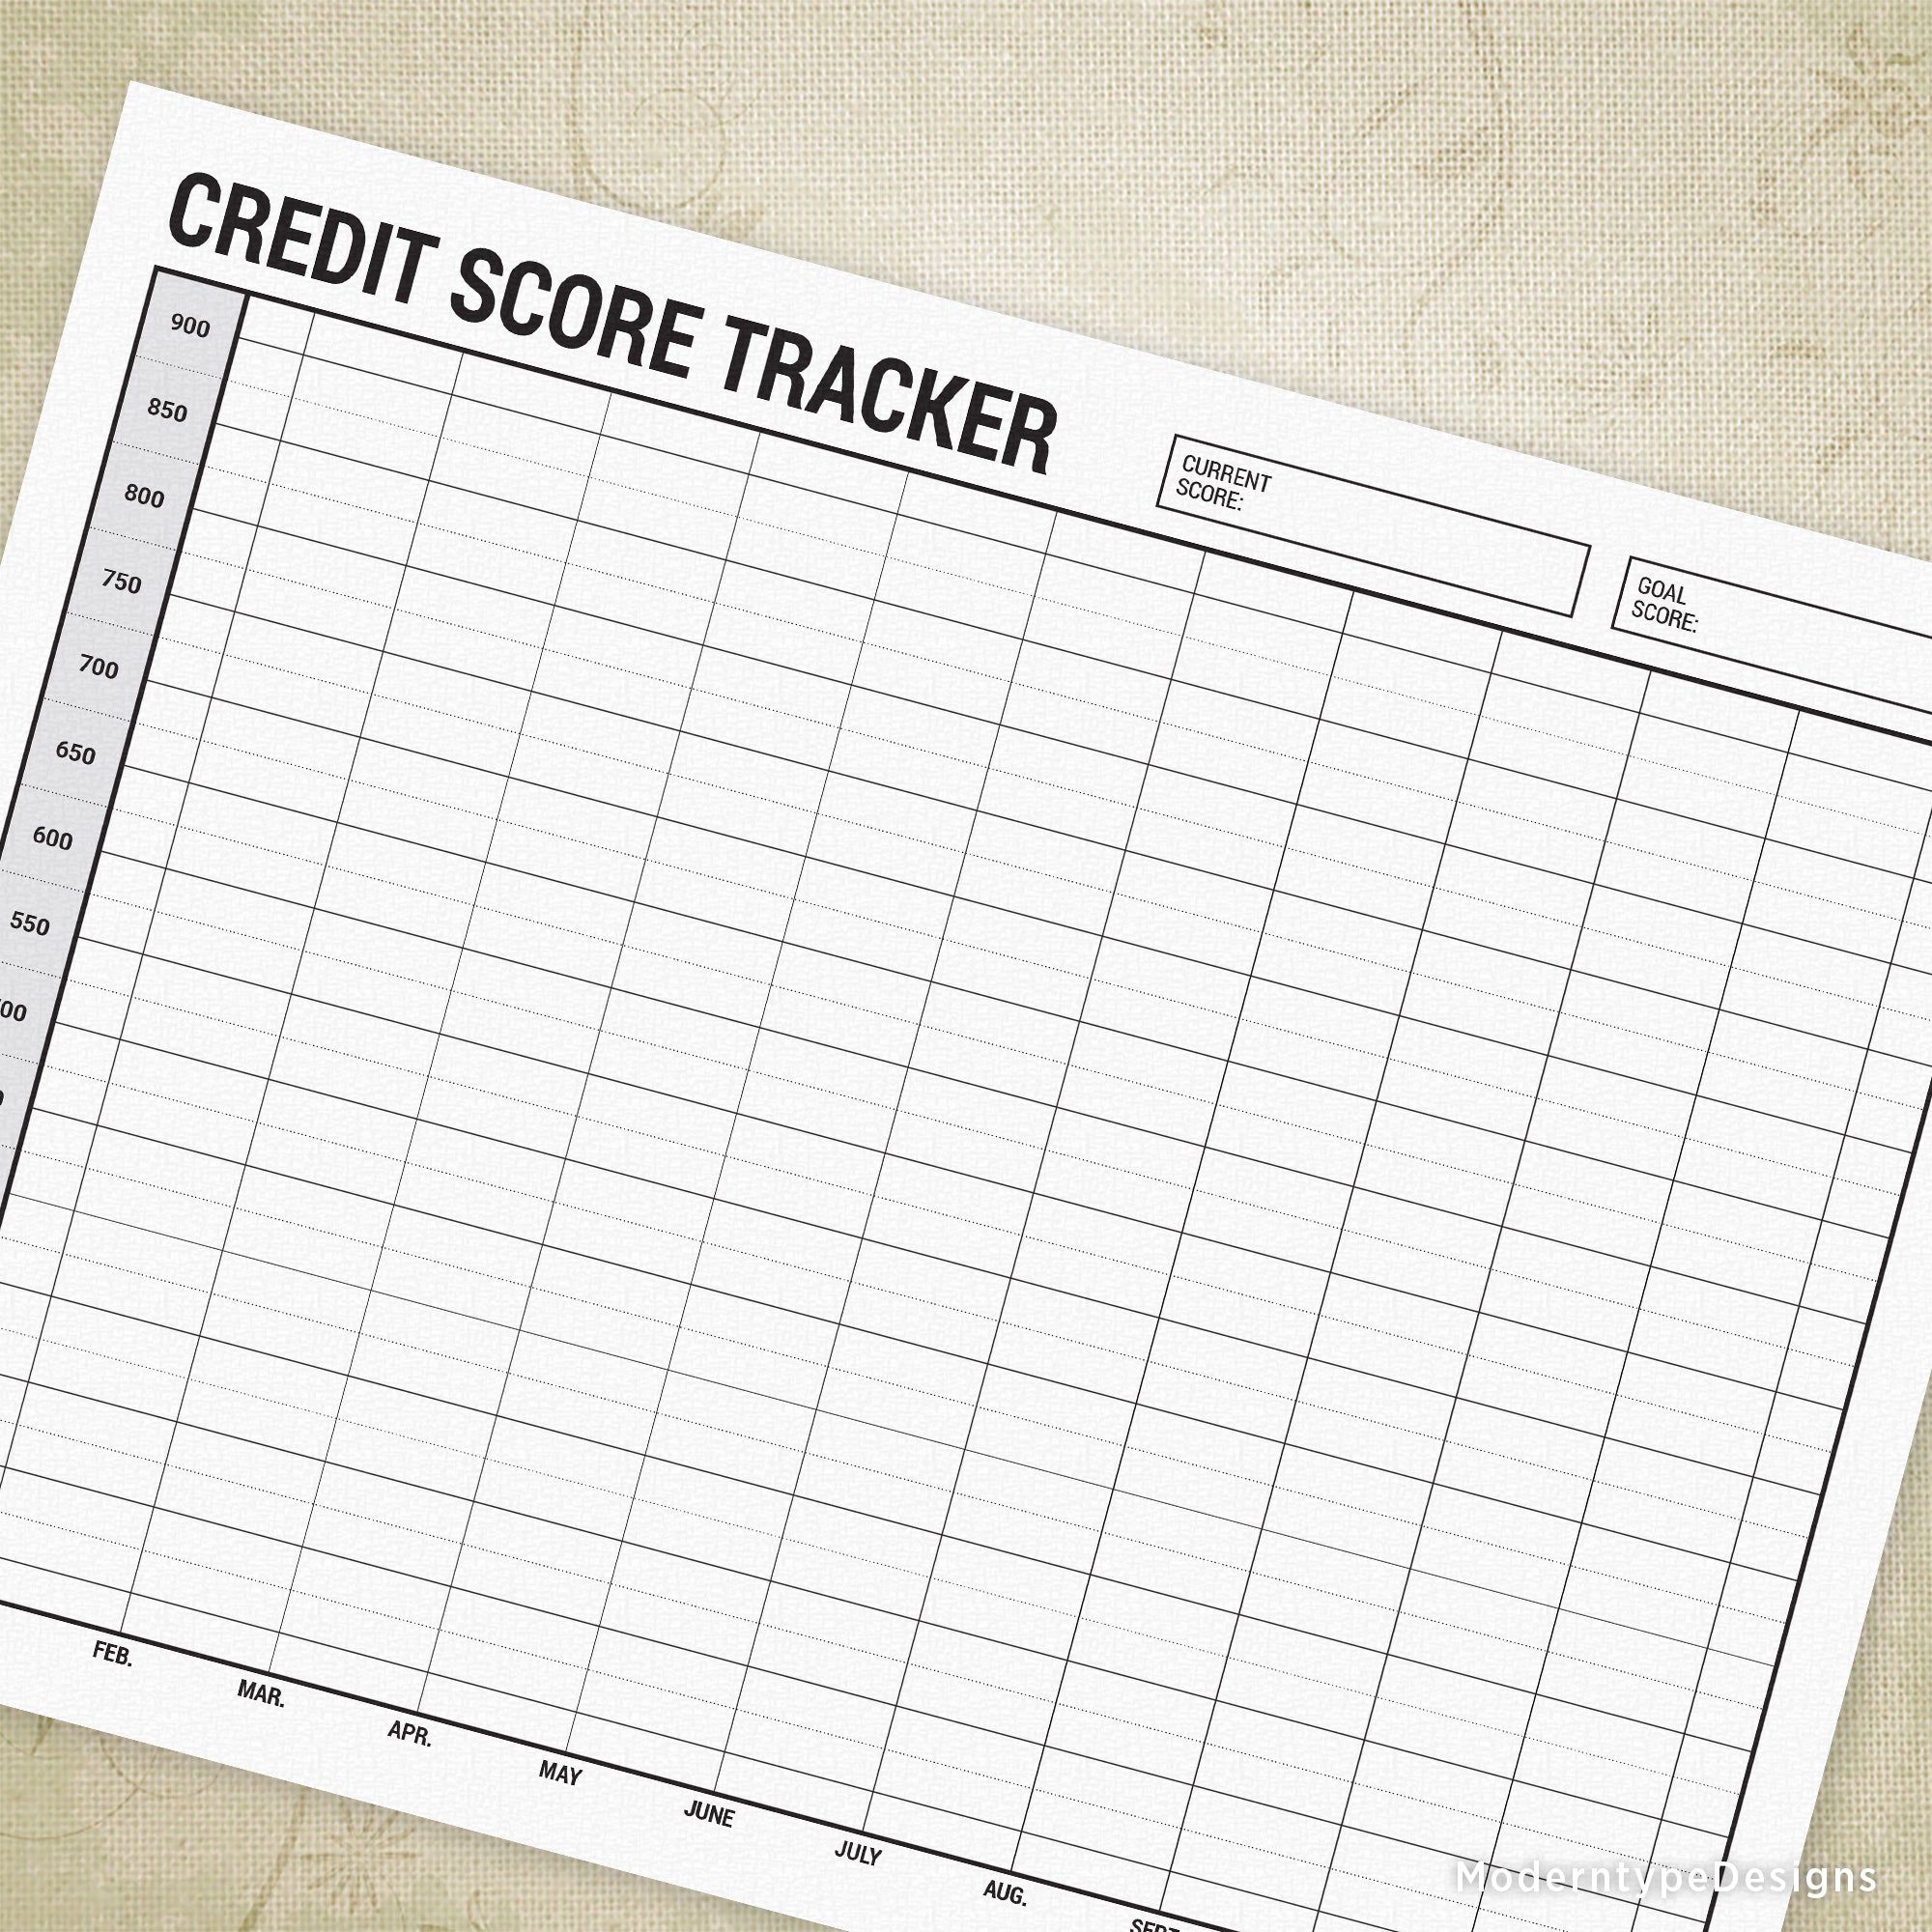 The best credit monitoring services that can help you spot fraud early